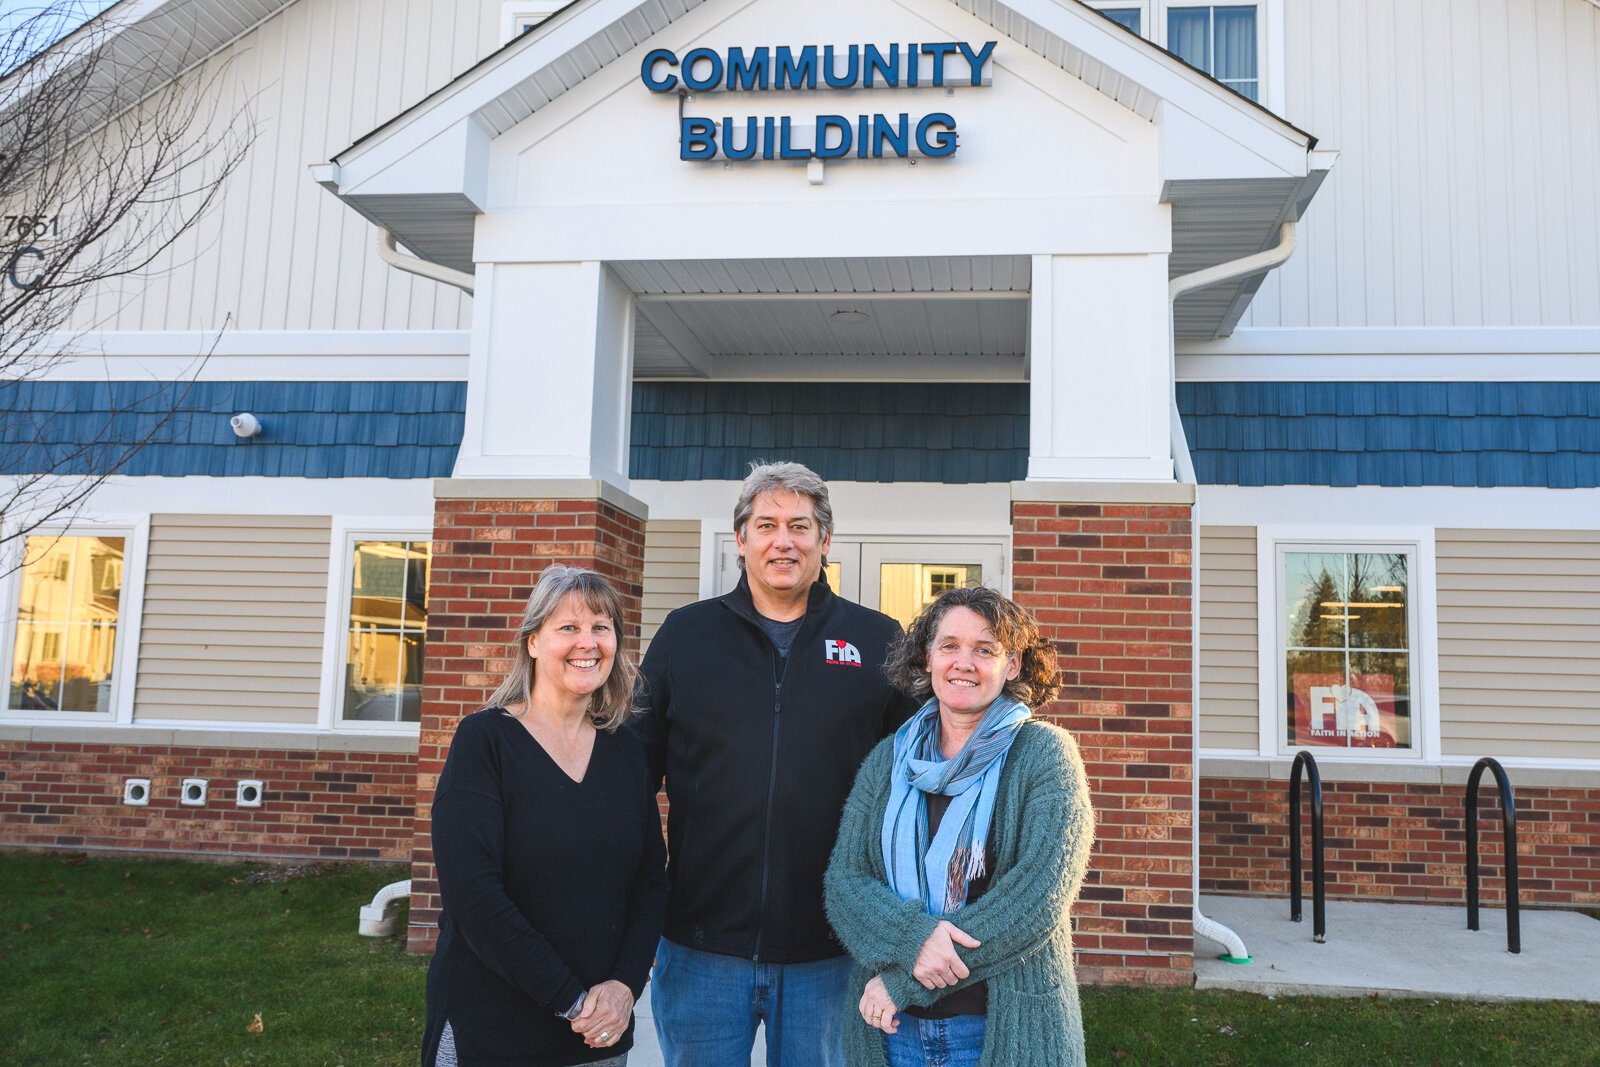 Sarah Shugart, Craig Rafail, and Wendy Carty-Saxon outside of the Hilltop View Apartments' community building.